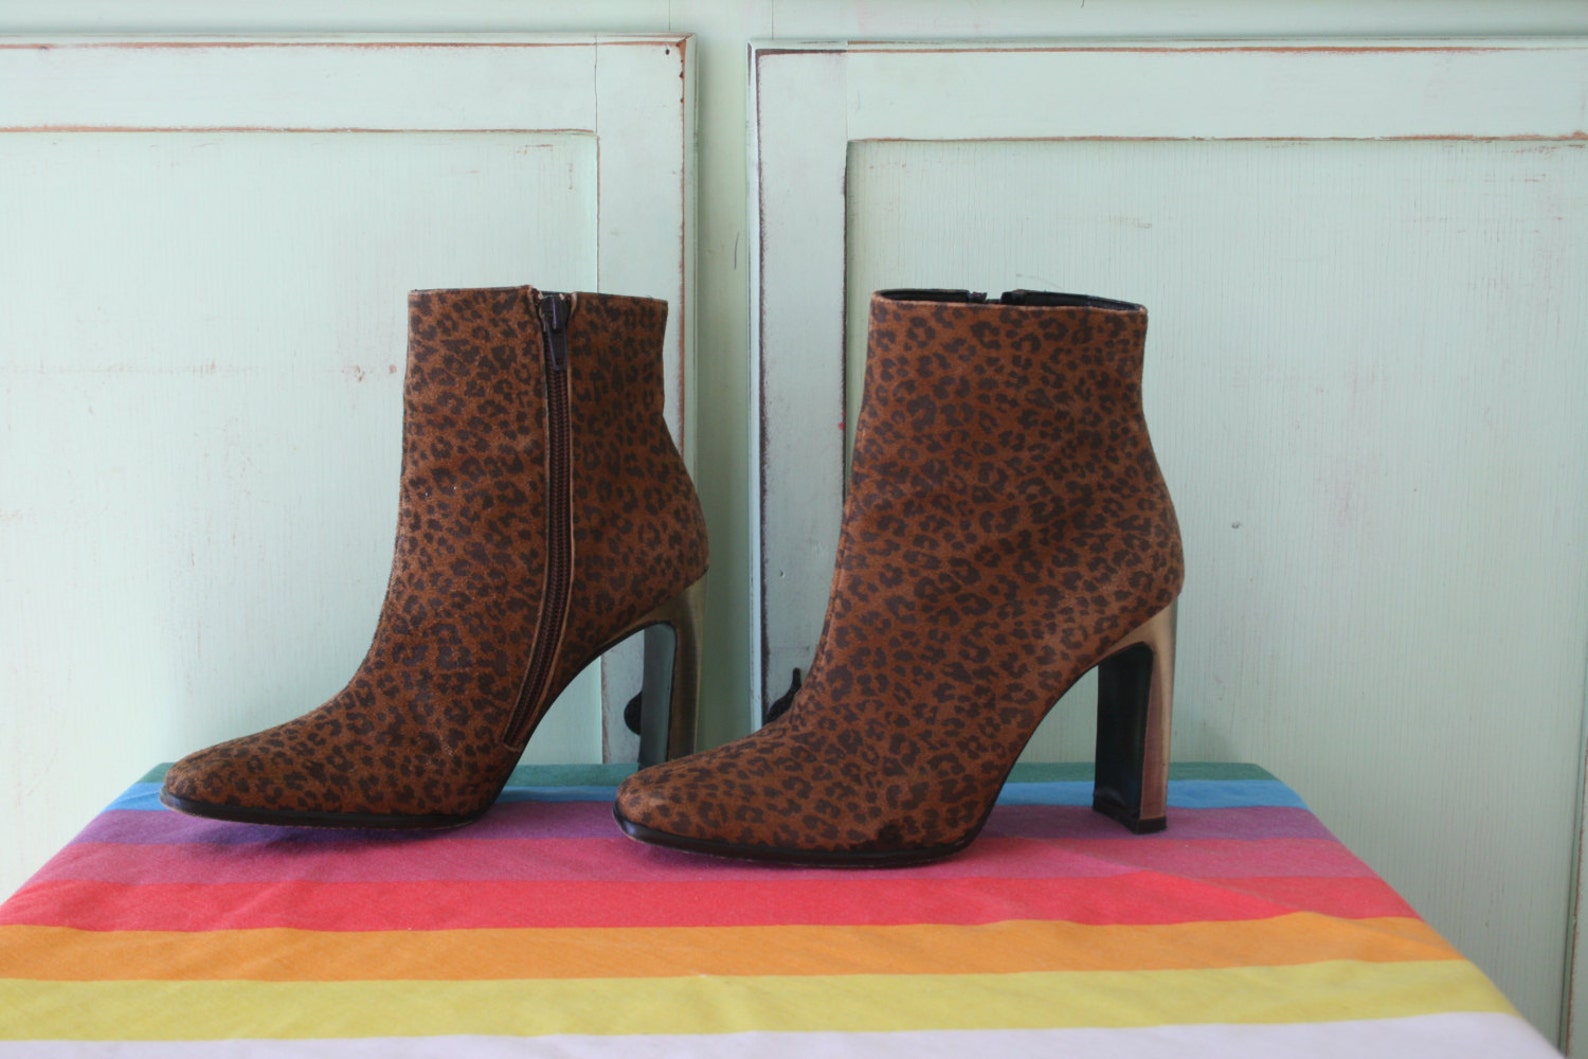 1980s leopard boots...leather. flats. 1980s. hipster. retro. closed toed. dancing. ballet. indie. animal print. heeled boots. st